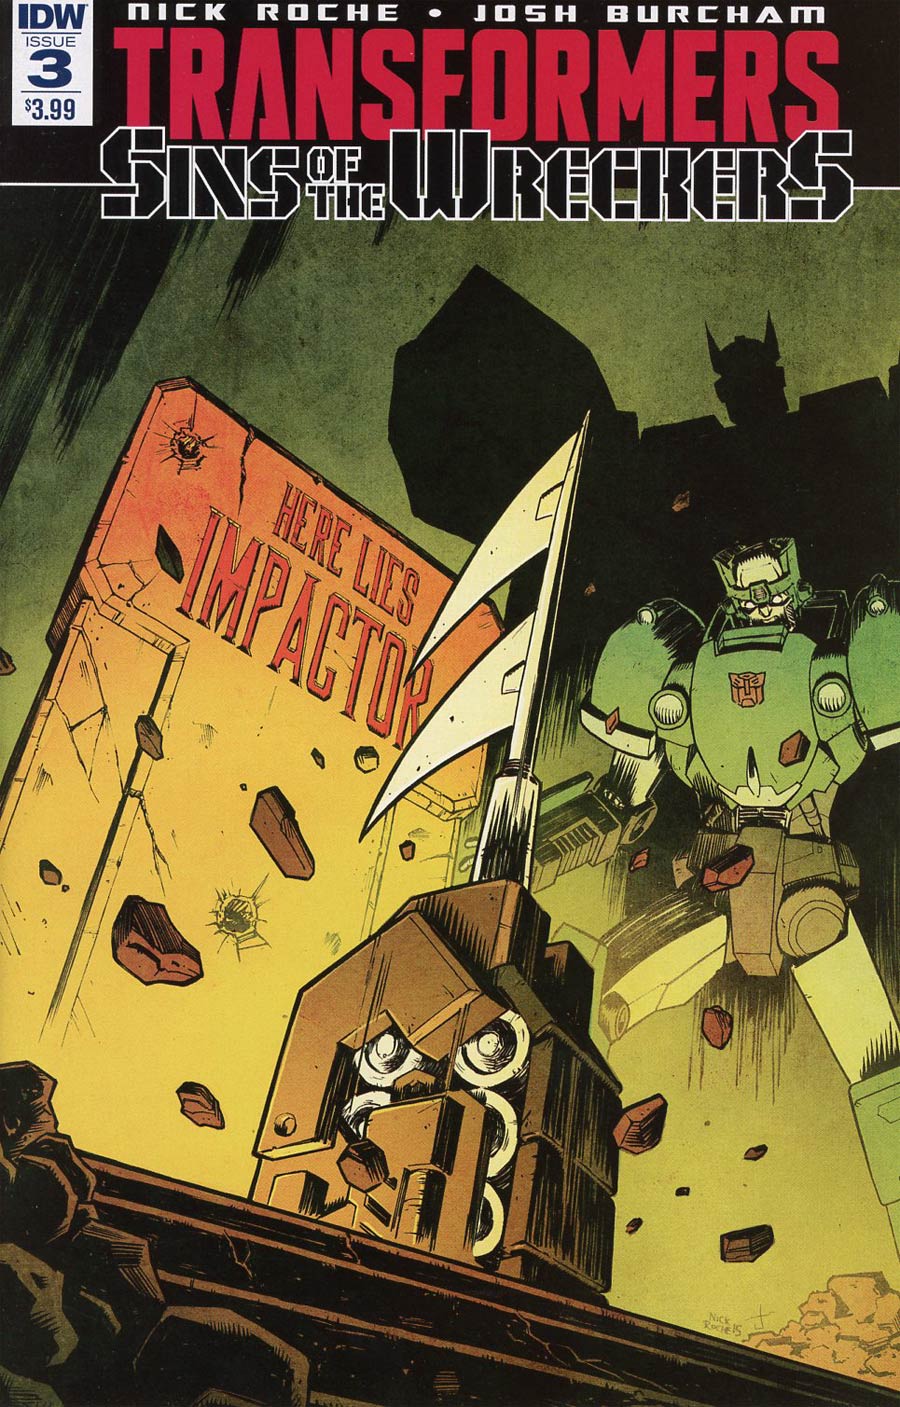 Transformers Sins Of The Wreckers #3 Cover A Regular Nick Roche Cover